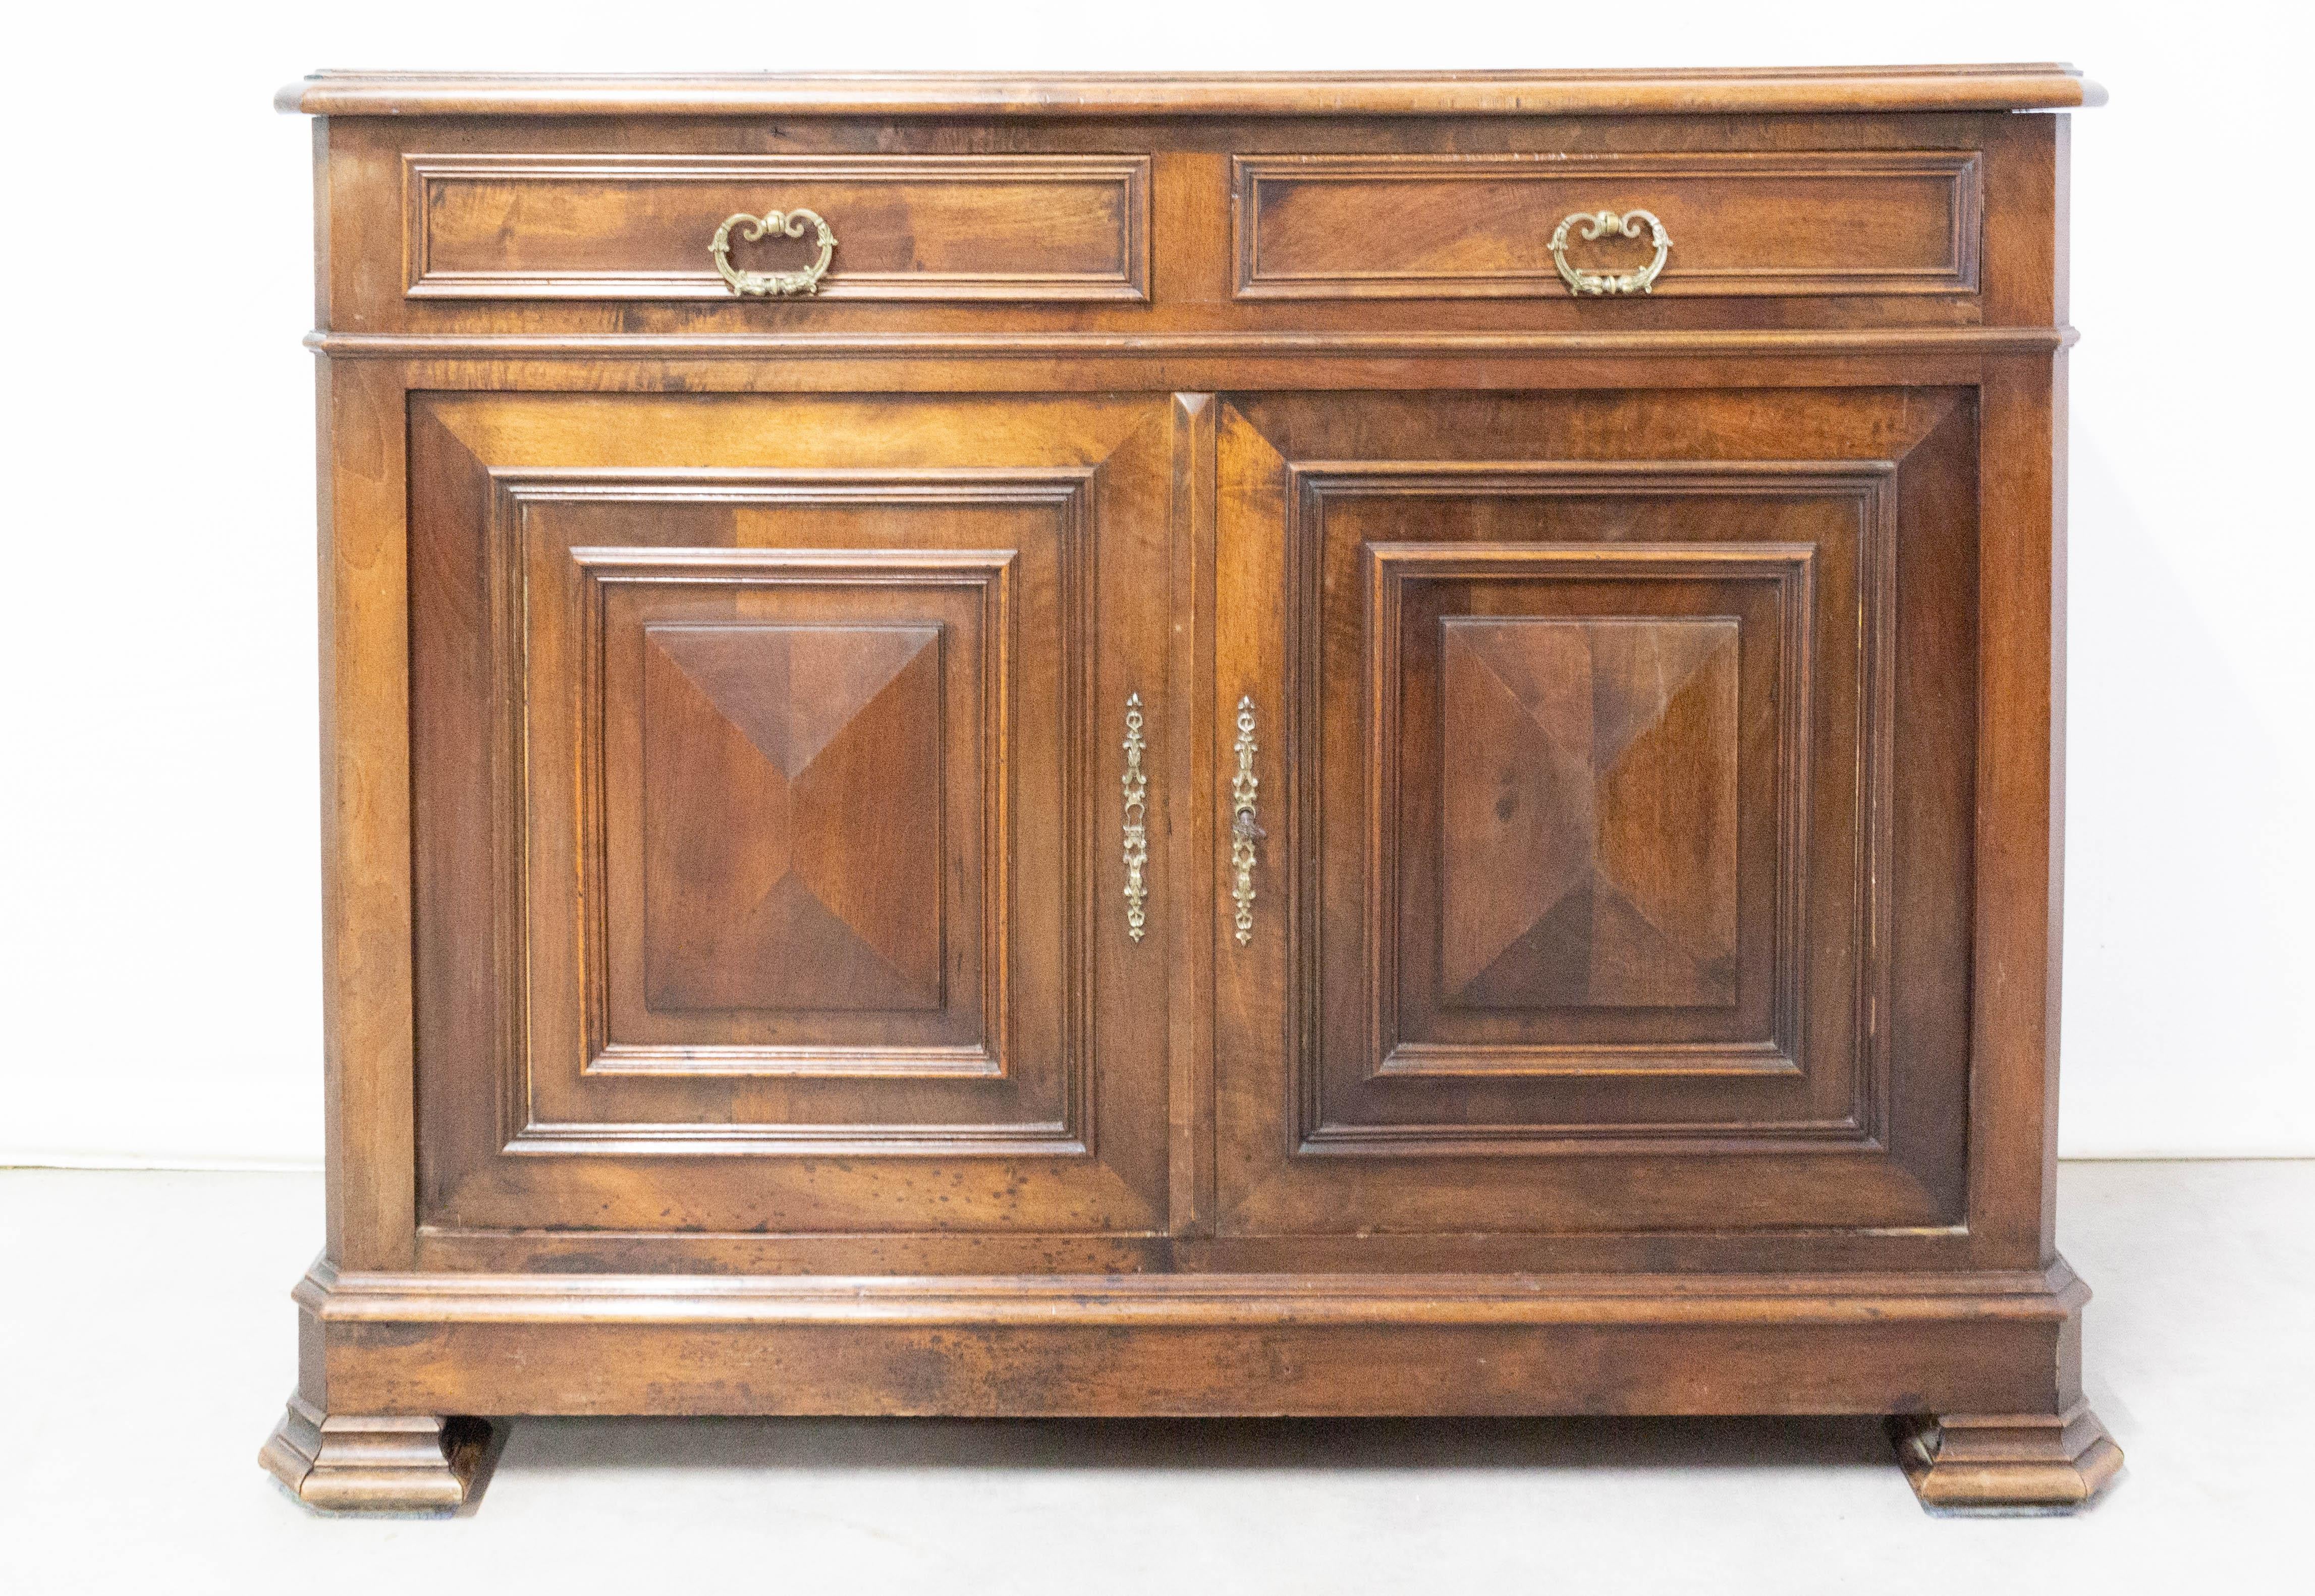 Antique carved walnut buffet French credenza, late 19th century
Walnut
Superb patina 
Good condition

For shipping:
50/100/127 cm 66 kg.